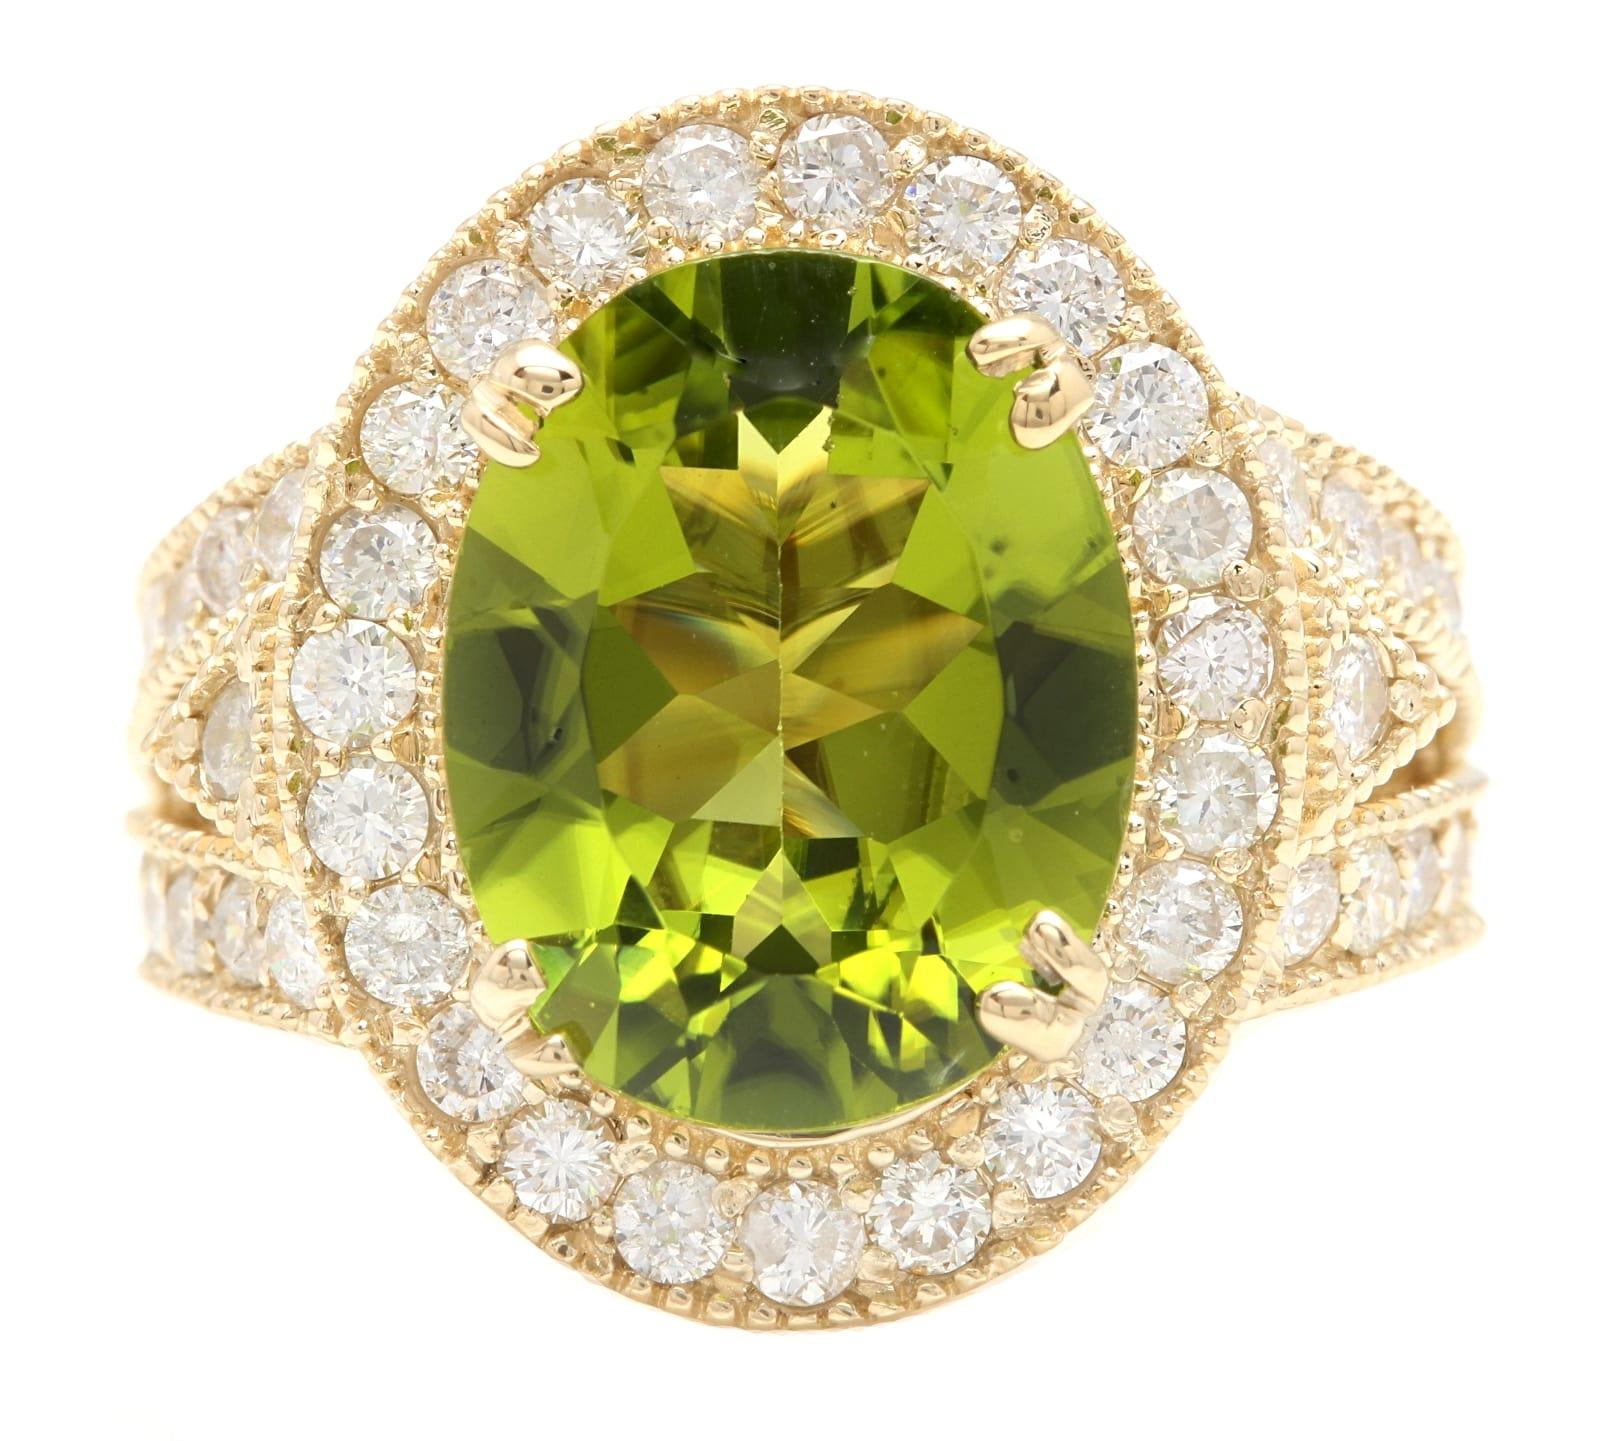 7.60 Carats Impressive Natural Peridot and Diamond 14K Yellow Gold Ring

Suggested Replacement Value: Approx. $7,500.00

Total Natural Peridot Weight is: Approx. 6.00 Carats

Peridot Measures: Approx. 14.00 x 10.00mm

Natural Round Diamonds Weight: